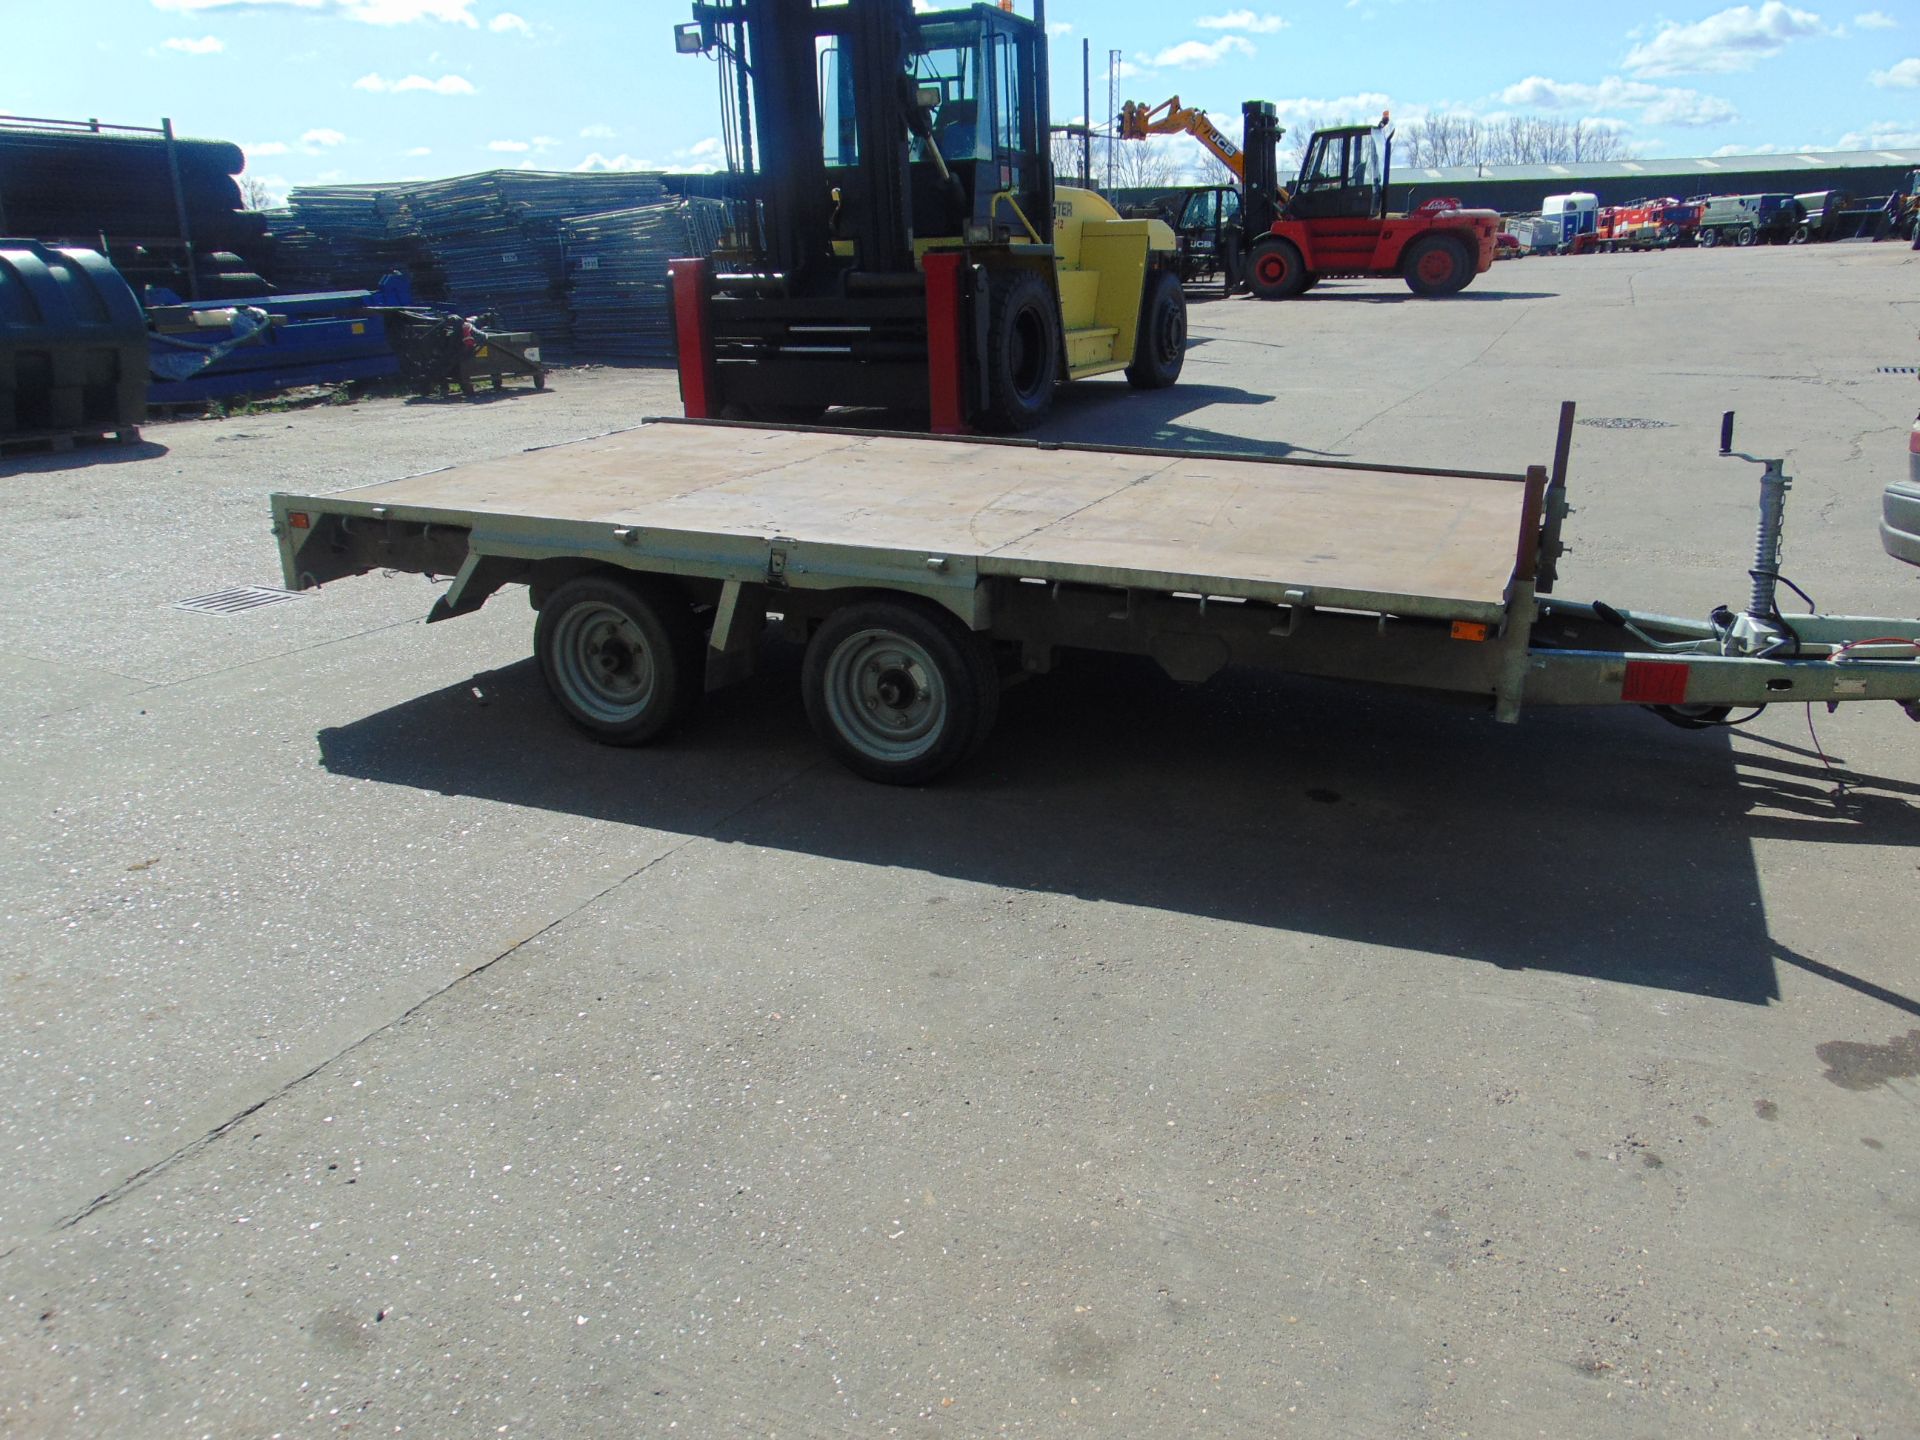 INDESPENSION 3500 KGS GALVANISED CAR/ PLANT TRAILER 12ft 6 ins X 6ft 6 ins 2 axle - Image 3 of 12